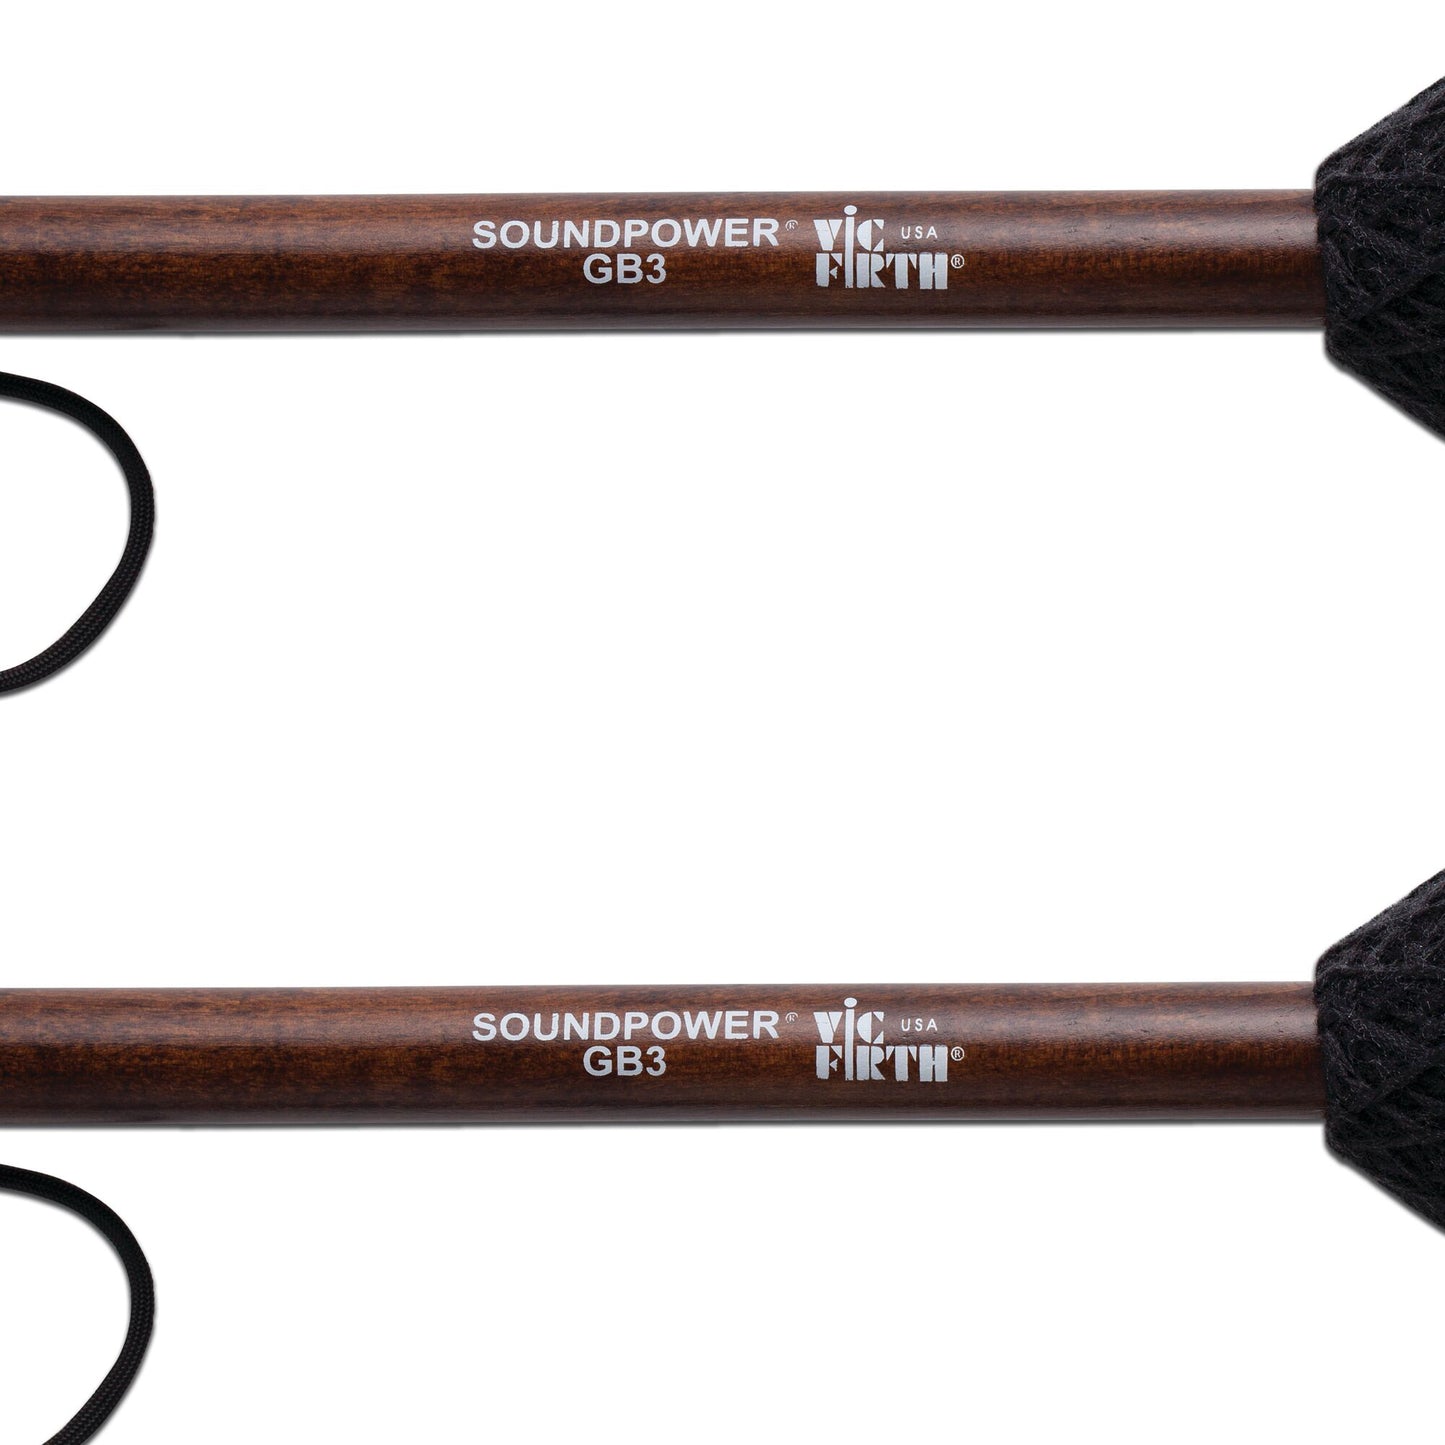 GB3 - Soundpower Heavy Gong Beater Mallets